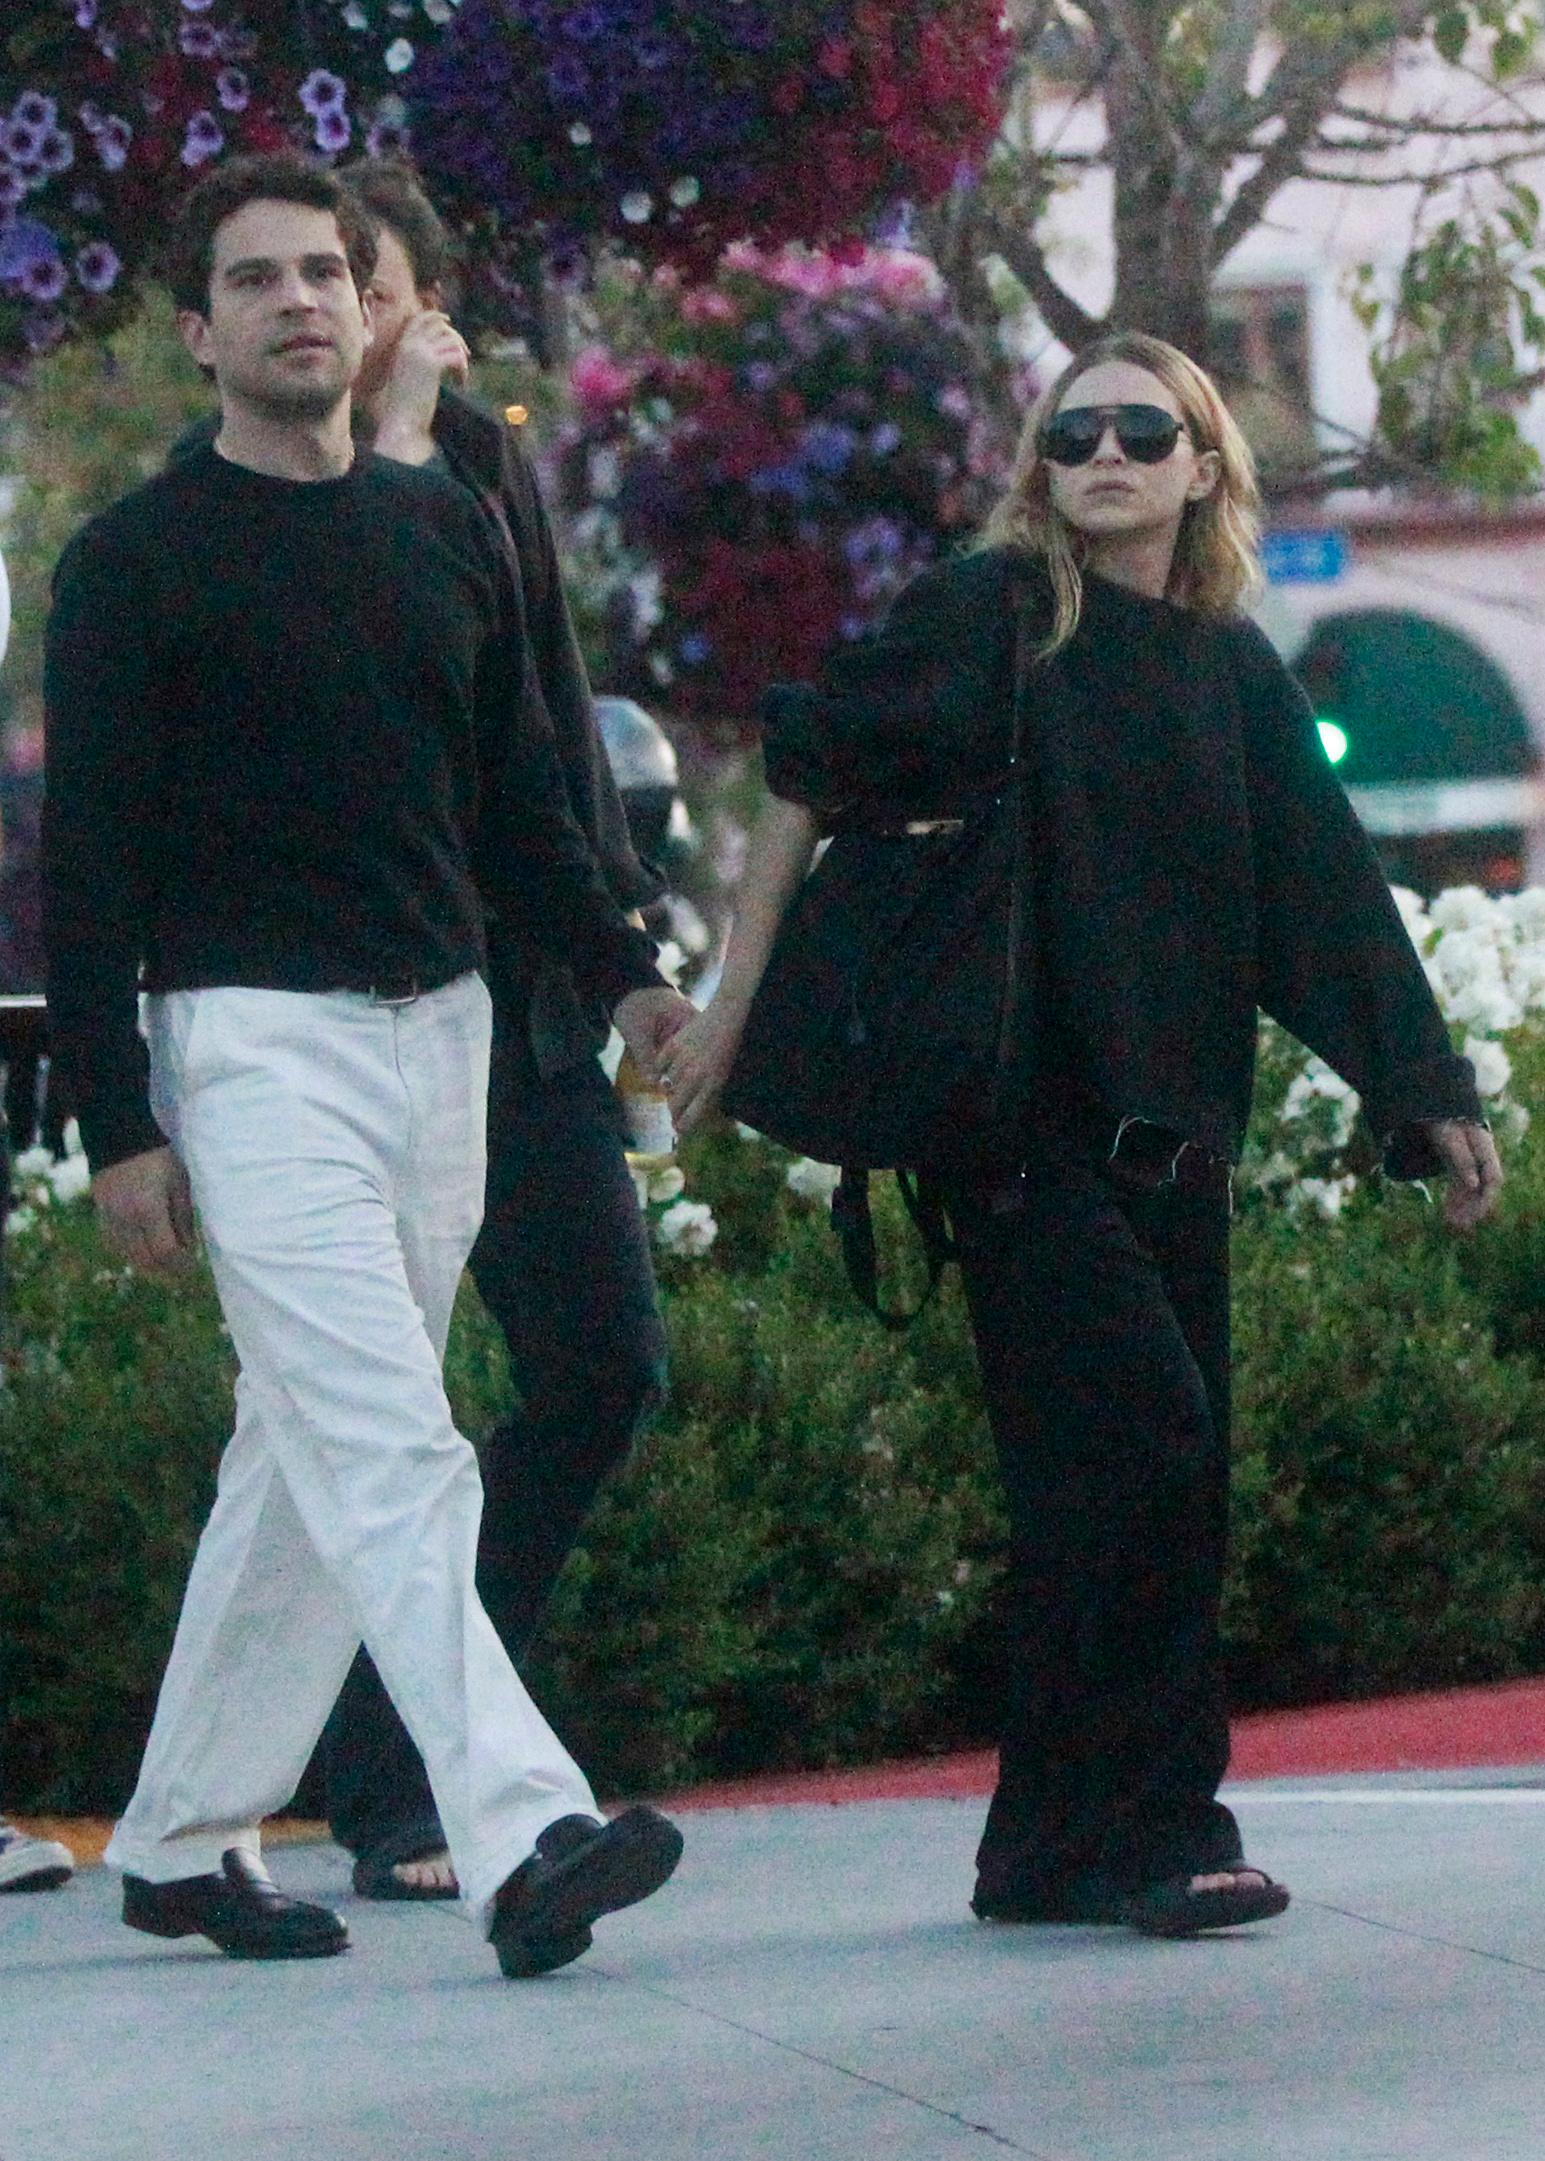 Ashley Olsen Has Reportedly Tied The Knot With Longtime Beau Louis Eisner In Private Ceremony